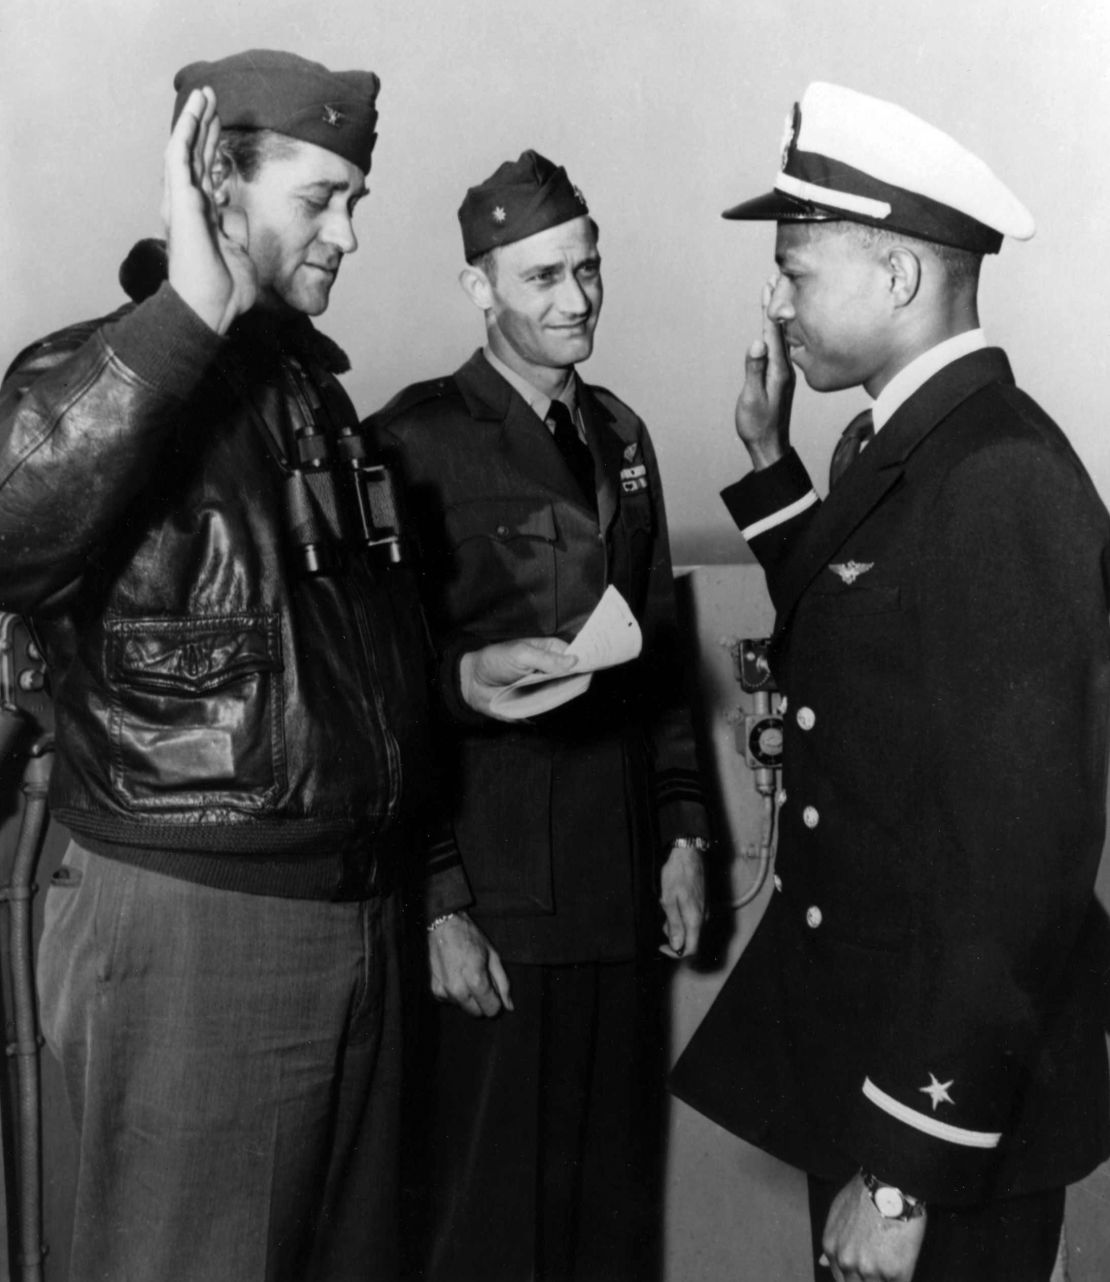 Brown was sworn in as an officer in April 1949.